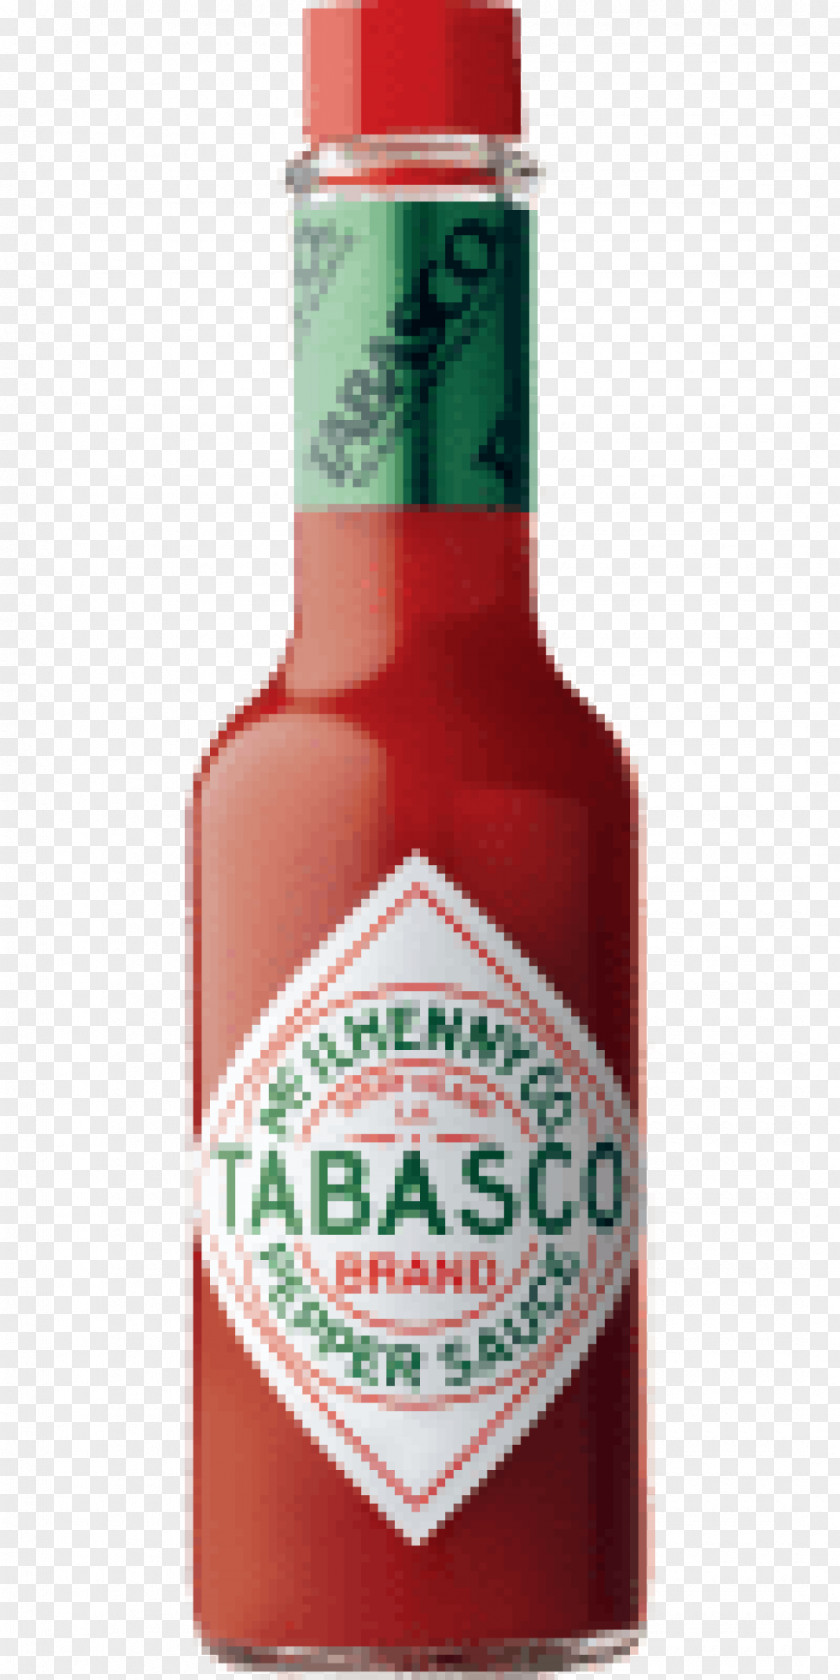 Hot Sauce Day Tabasco Pepper Chili PNG